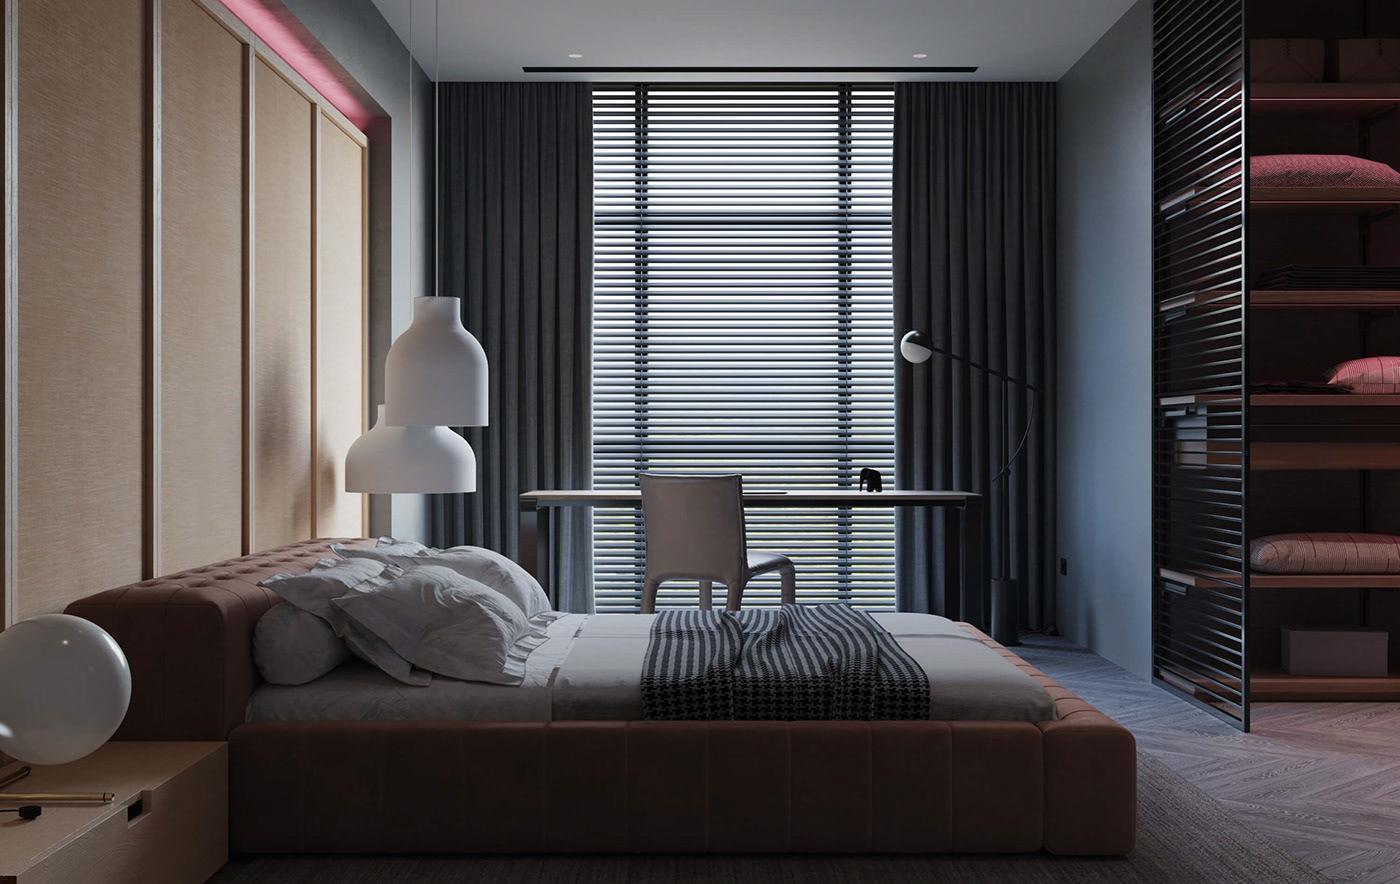 The master bedroom has a modern gray color, combined with a cozy wood color